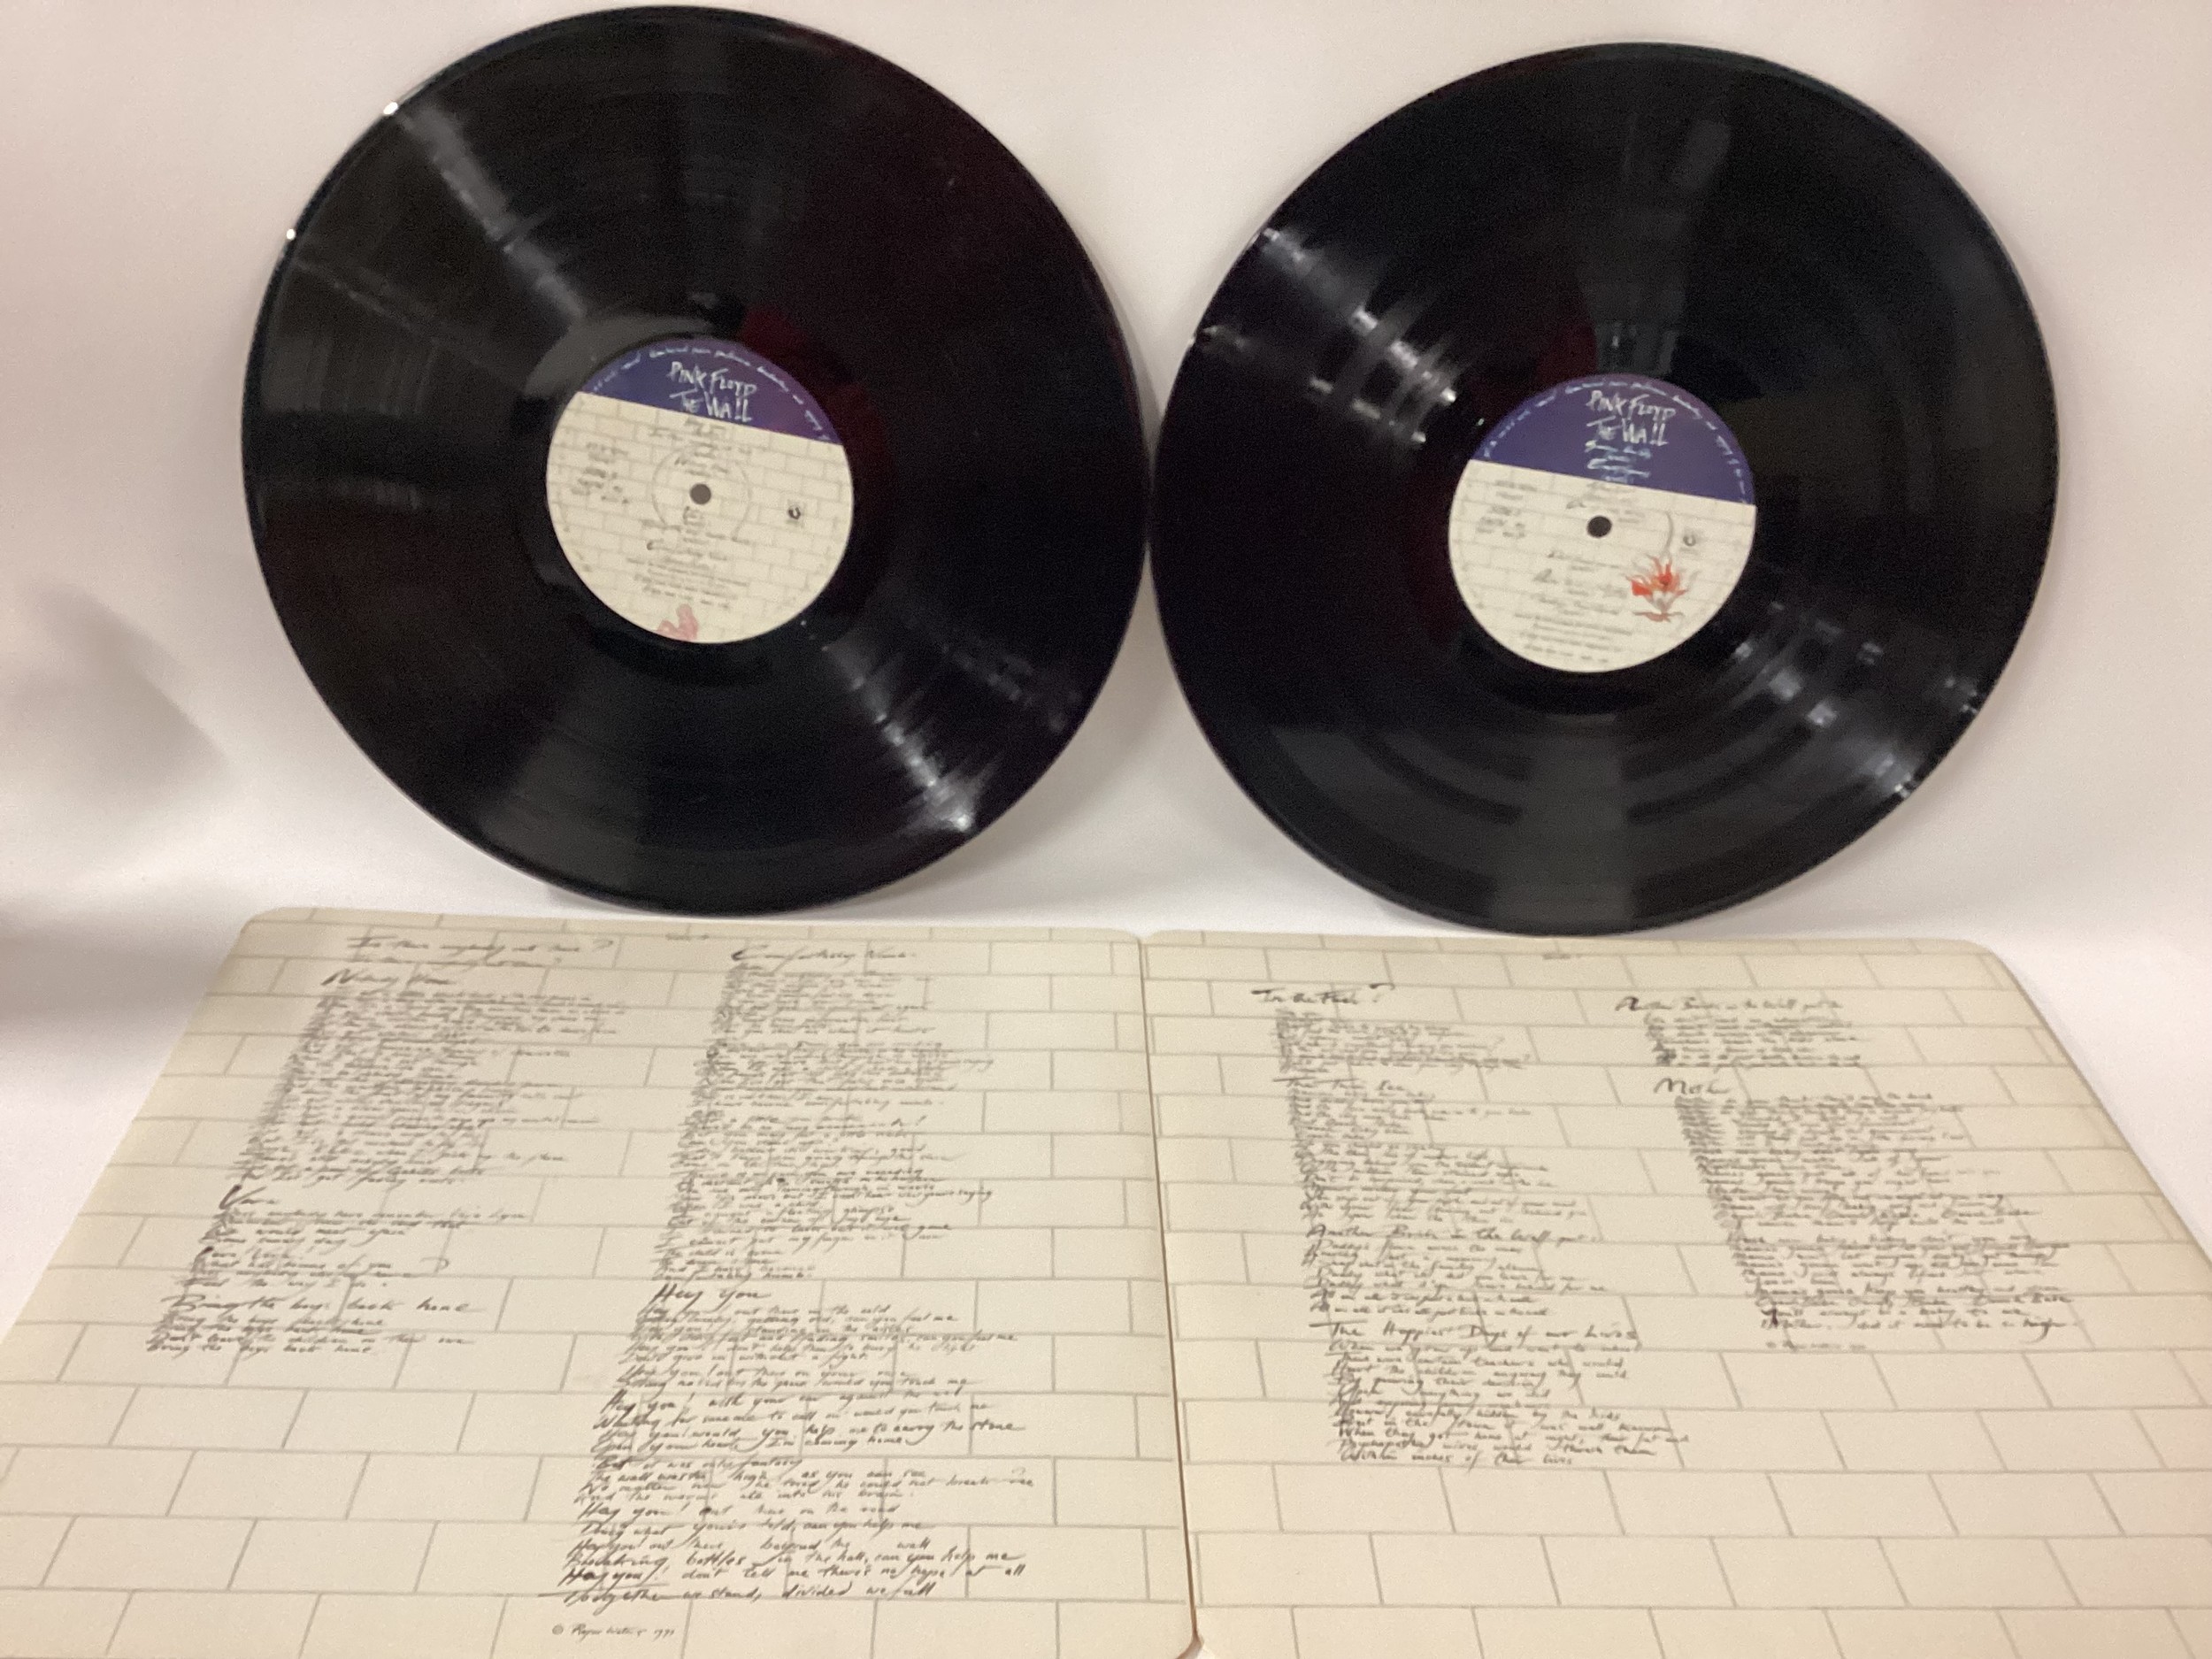 PINK FLOYD VINYL LP RECORDS X 2. Copies here include ‘The Wall’ double album on Harvest SHDW 411 - Bild 4 aus 9